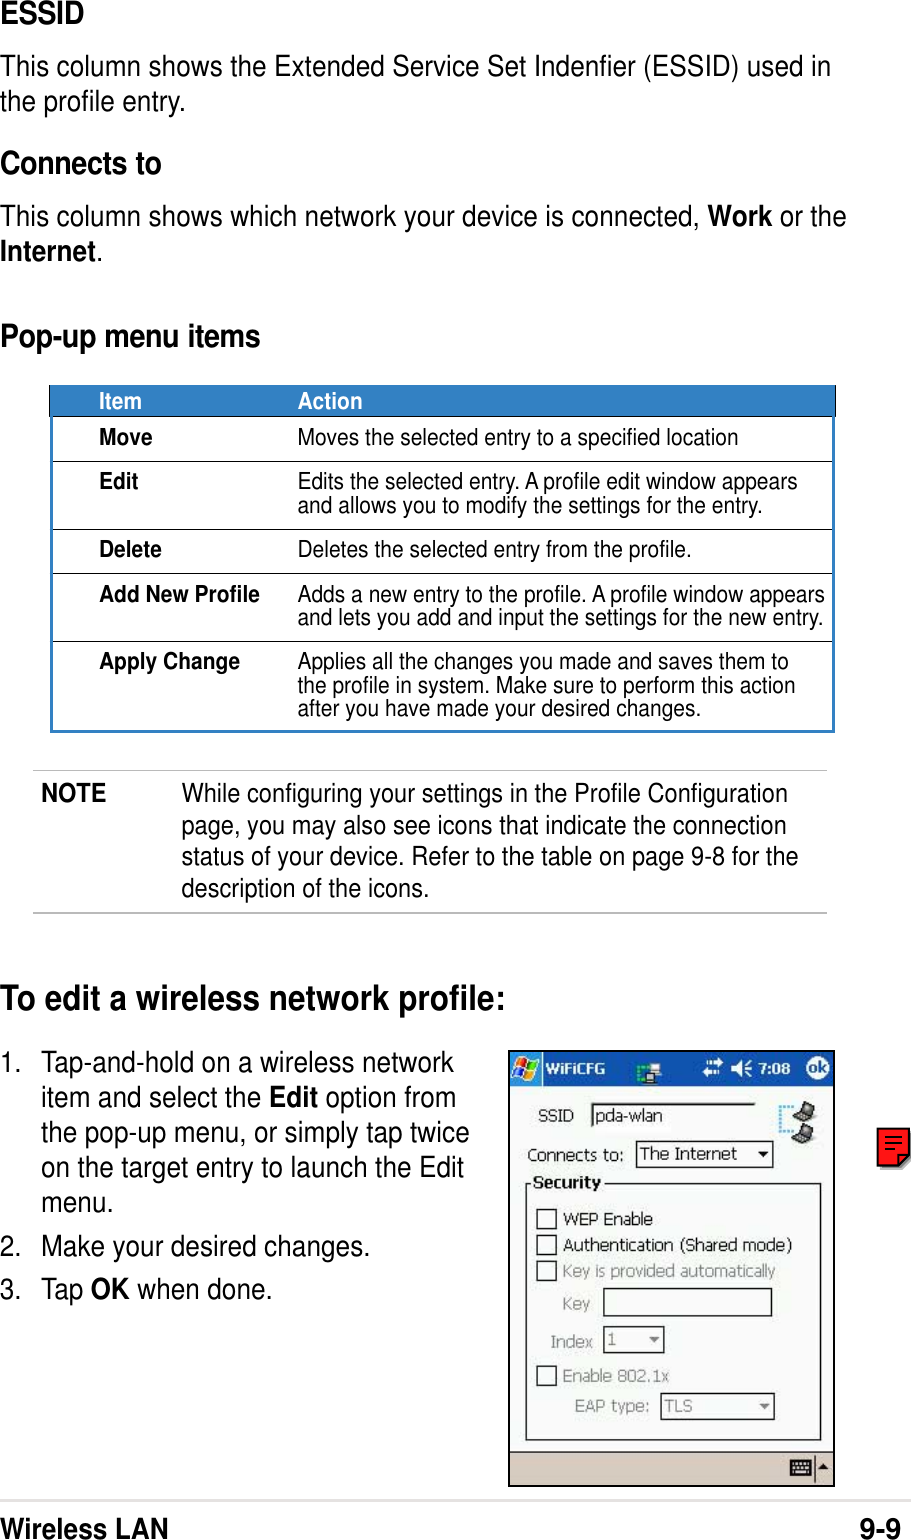 Wireless LAN9-9ESSIDThis column shows the Extended Service Set Indenfier (ESSID) used inthe profile entry.Connects toThis column shows which network your device is connected, Work or theInternet.Pop-up menu itemsItem ActionMove Moves the selected entry to a specified locationEdit Edits the selected entry. A profile edit window appearsand allows you to modify the settings for the entry.Delete Deletes the selected entry from the profile.Add New Profile Adds a new entry to the profile. A profile window appearsand lets you add and input the settings for the new entry.Apply Change Applies all the changes you made and saves them tothe profile in system. Make sure to perform this actionafter you have made your desired changes.NOTE While configuring your settings in the Profile Configurationpage, you may also see icons that indicate the connectionstatus of your device. Refer to the table on page 9-8 for thedescription of the icons.To edit a wireless network profile:1. Tap-and-hold on a wireless networkitem and select the Edit option fromthe pop-up menu, or simply tap twiceon the target entry to launch the Editmenu.2. Make your desired changes.3. Tap OK when done.